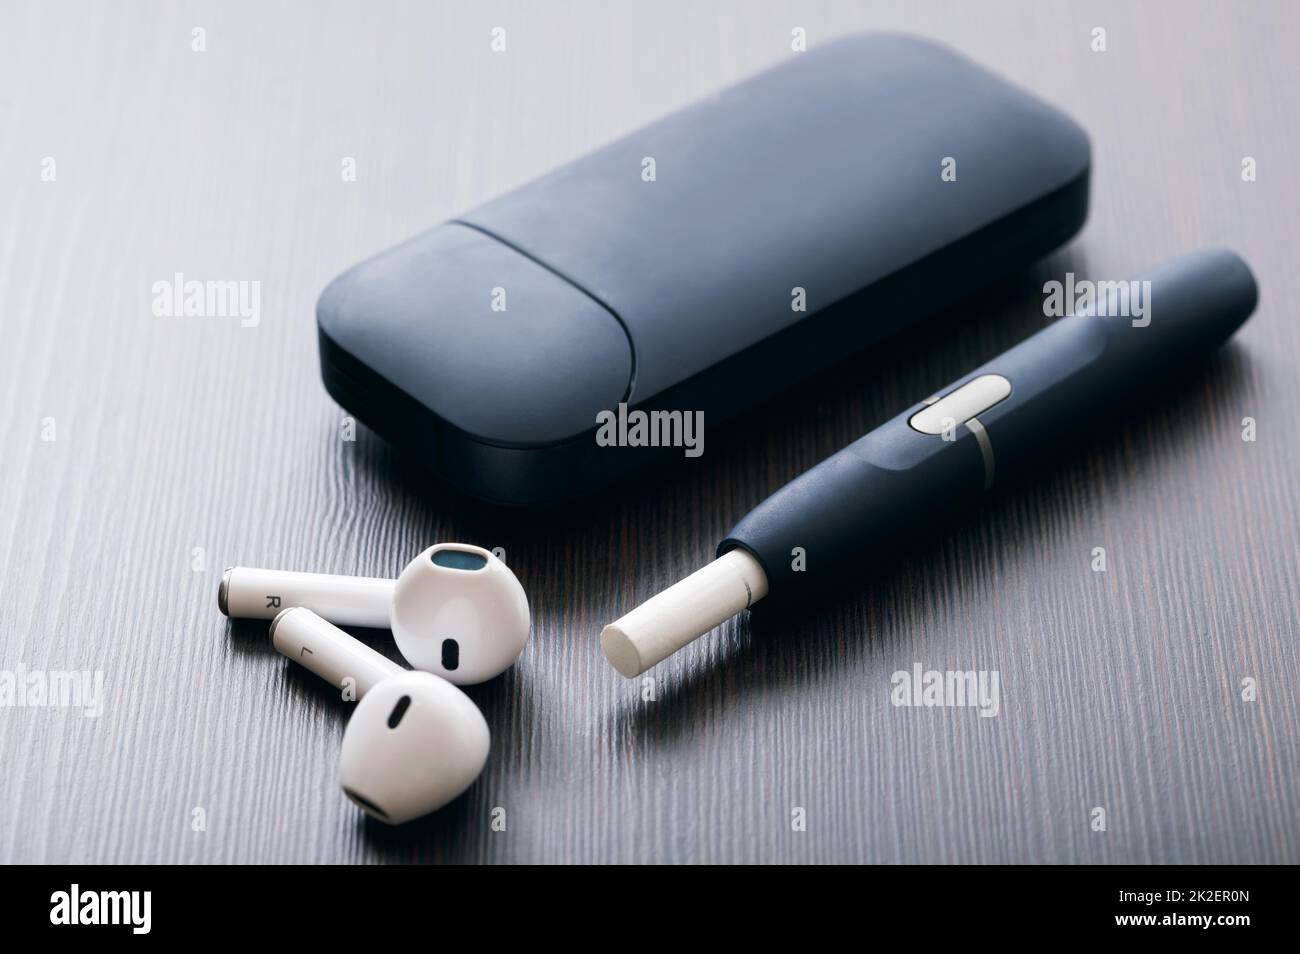 Tobacco heating system and white wireless earphones Stock Photo